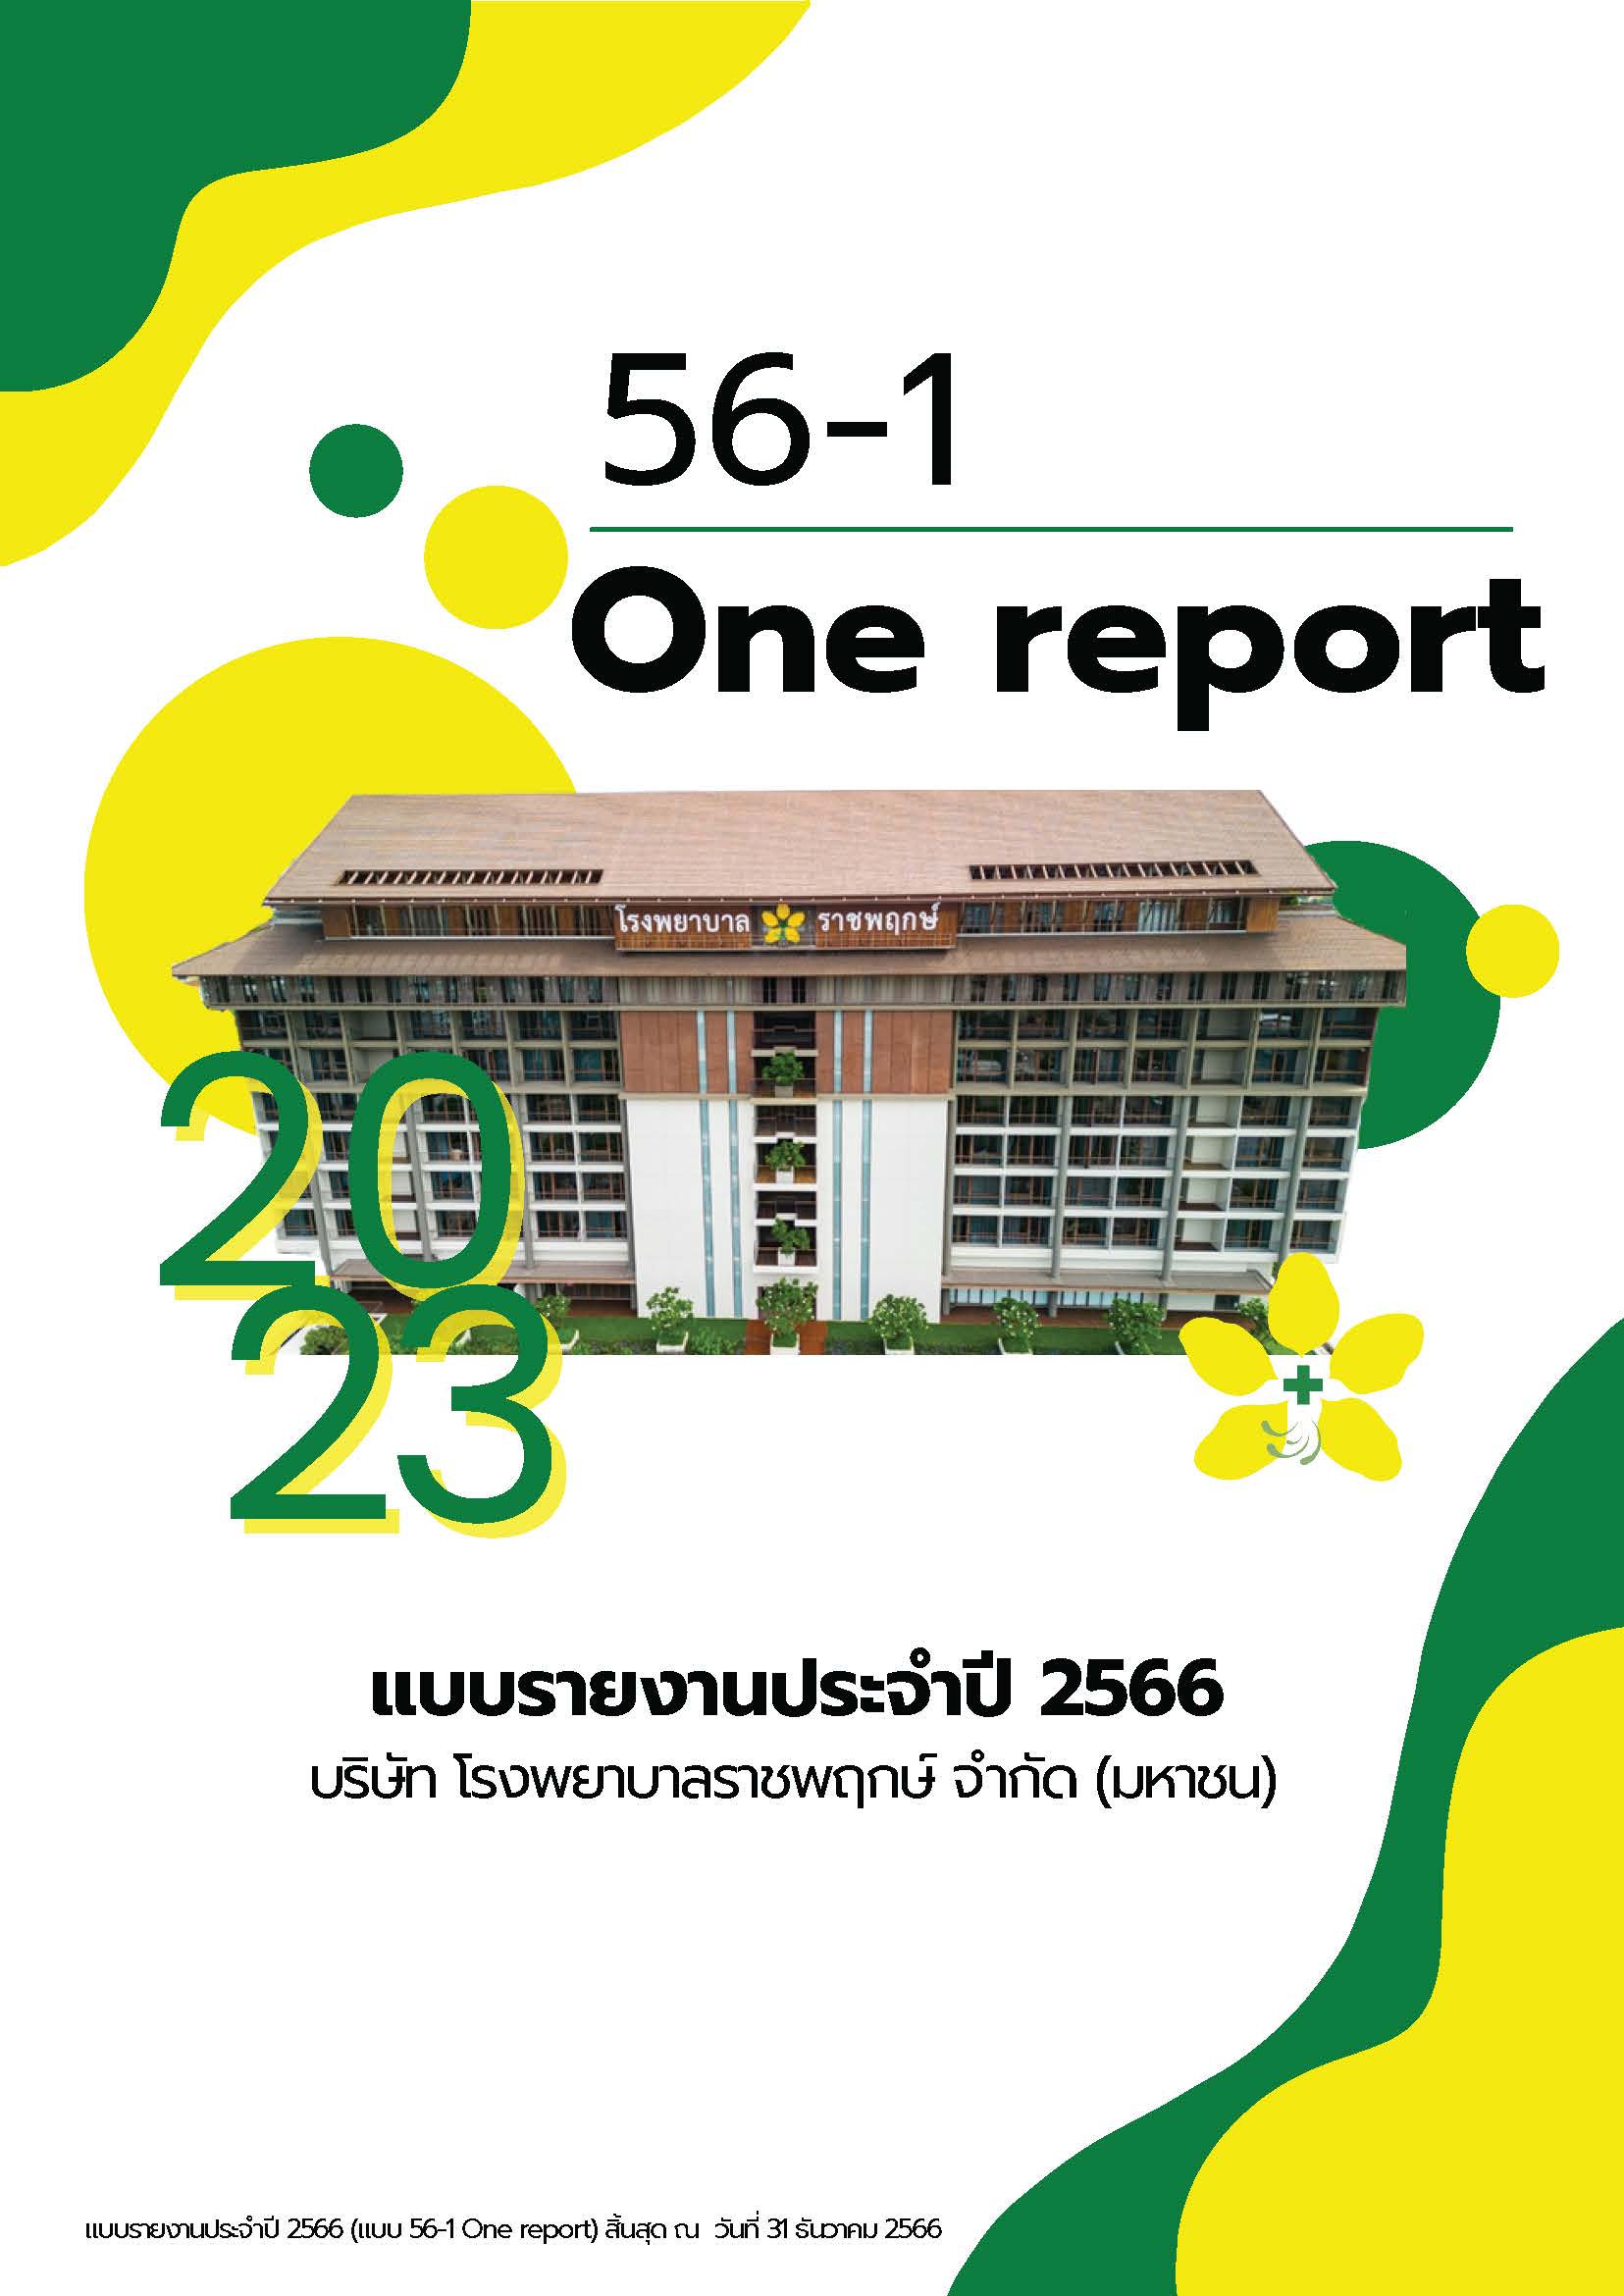 Annual Report 2023 (Form 56-1 One Report)